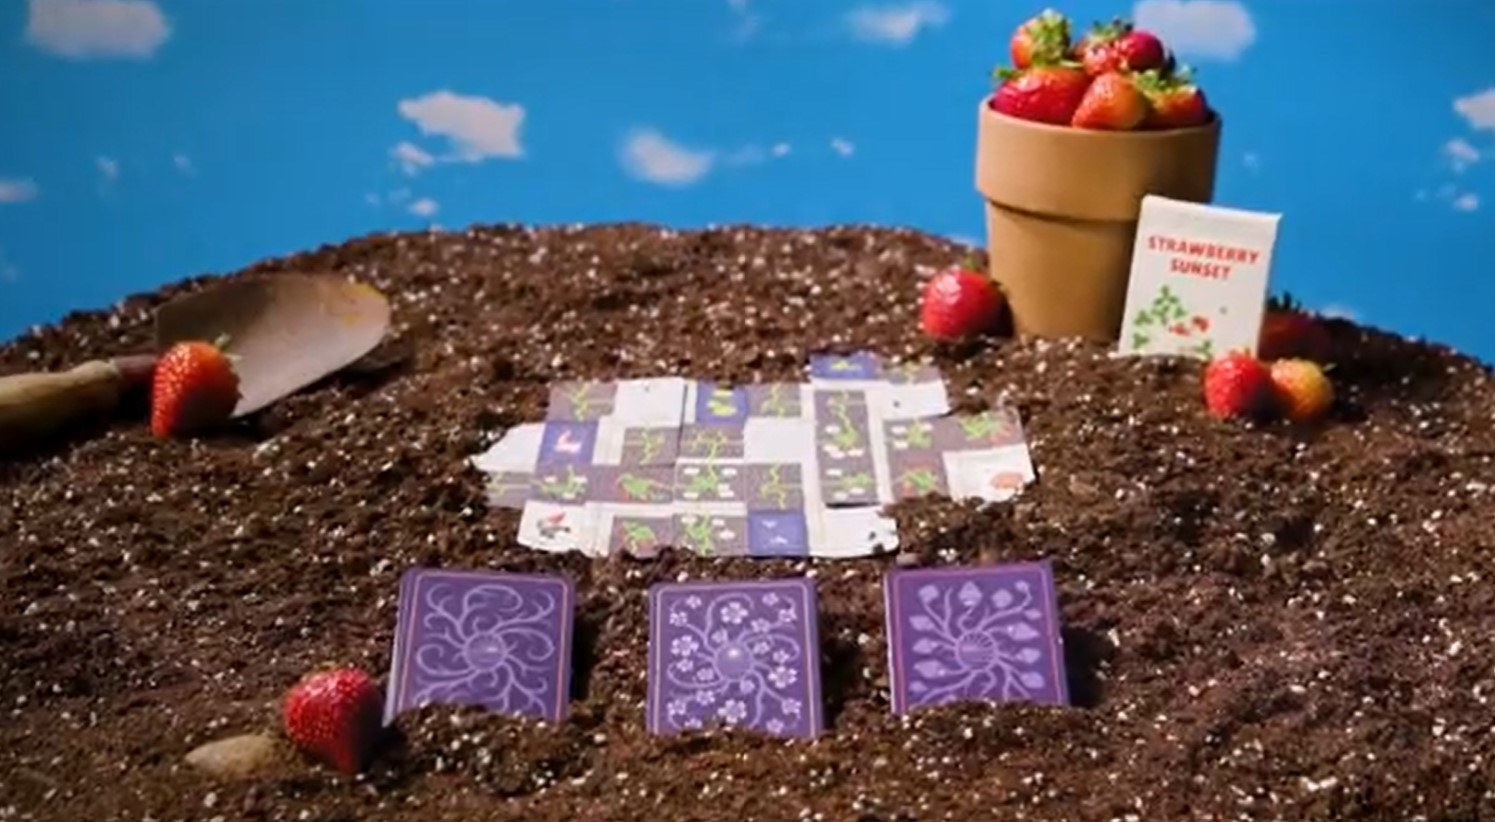 Strawberry Sunset cards buried in dirt